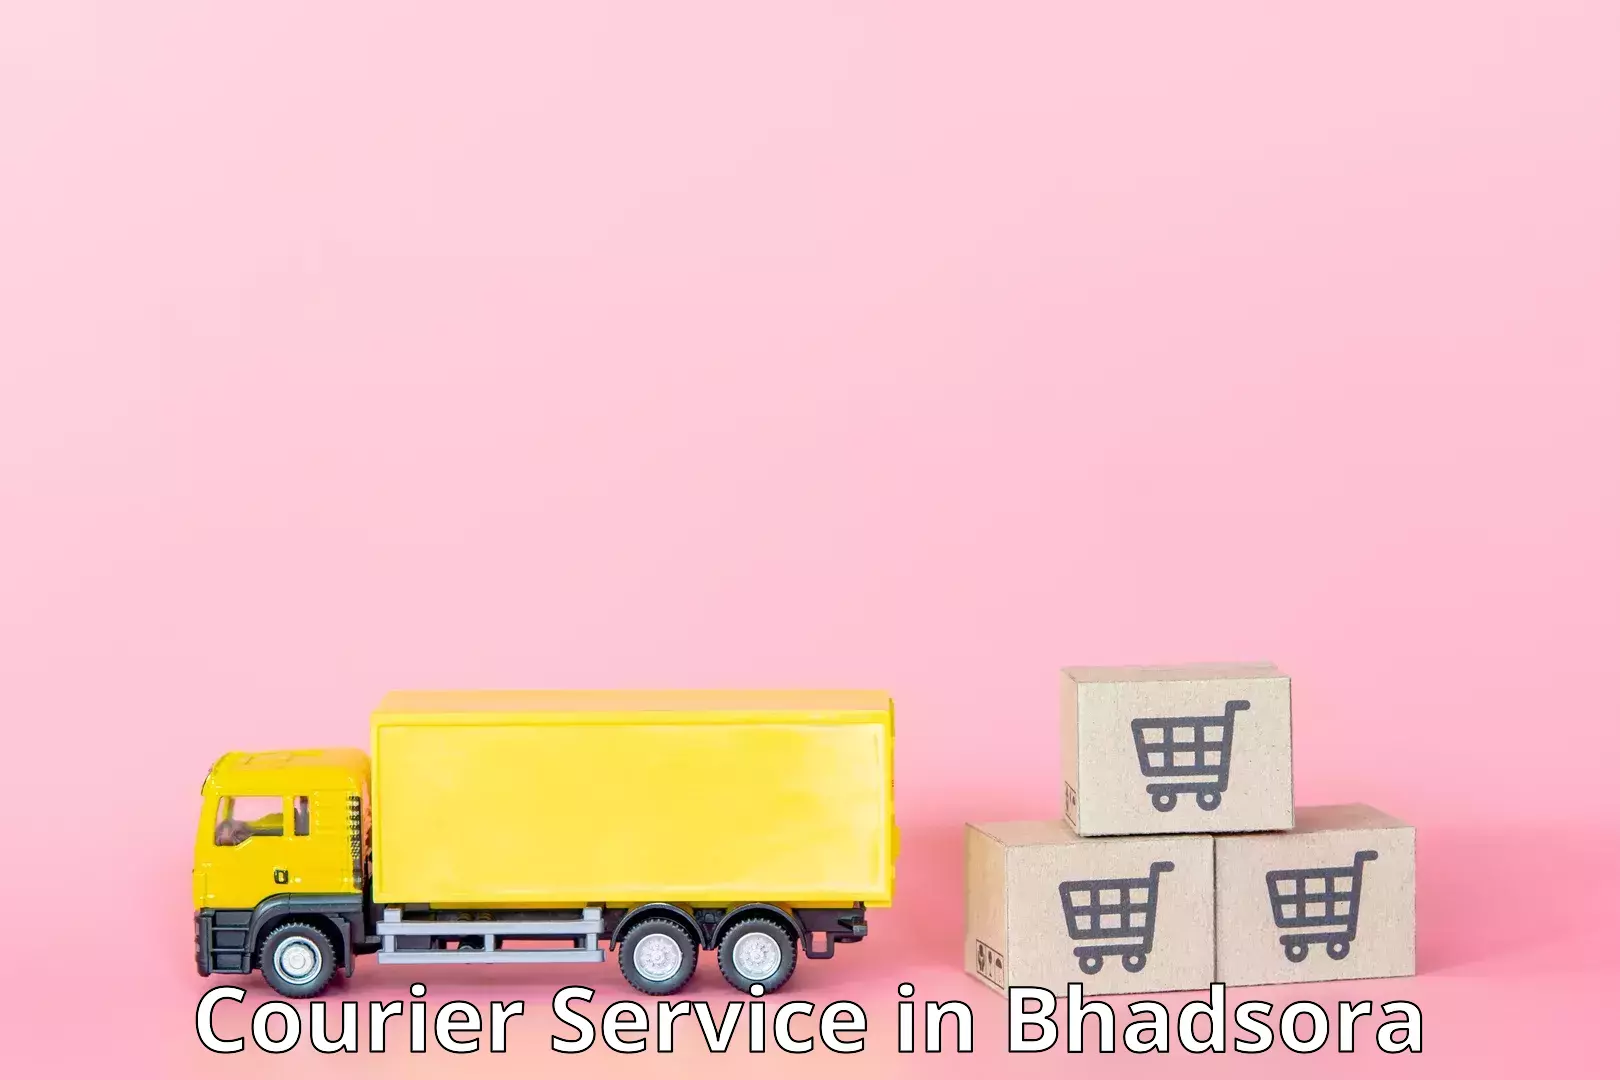 Courier service partnerships in Bhadsora